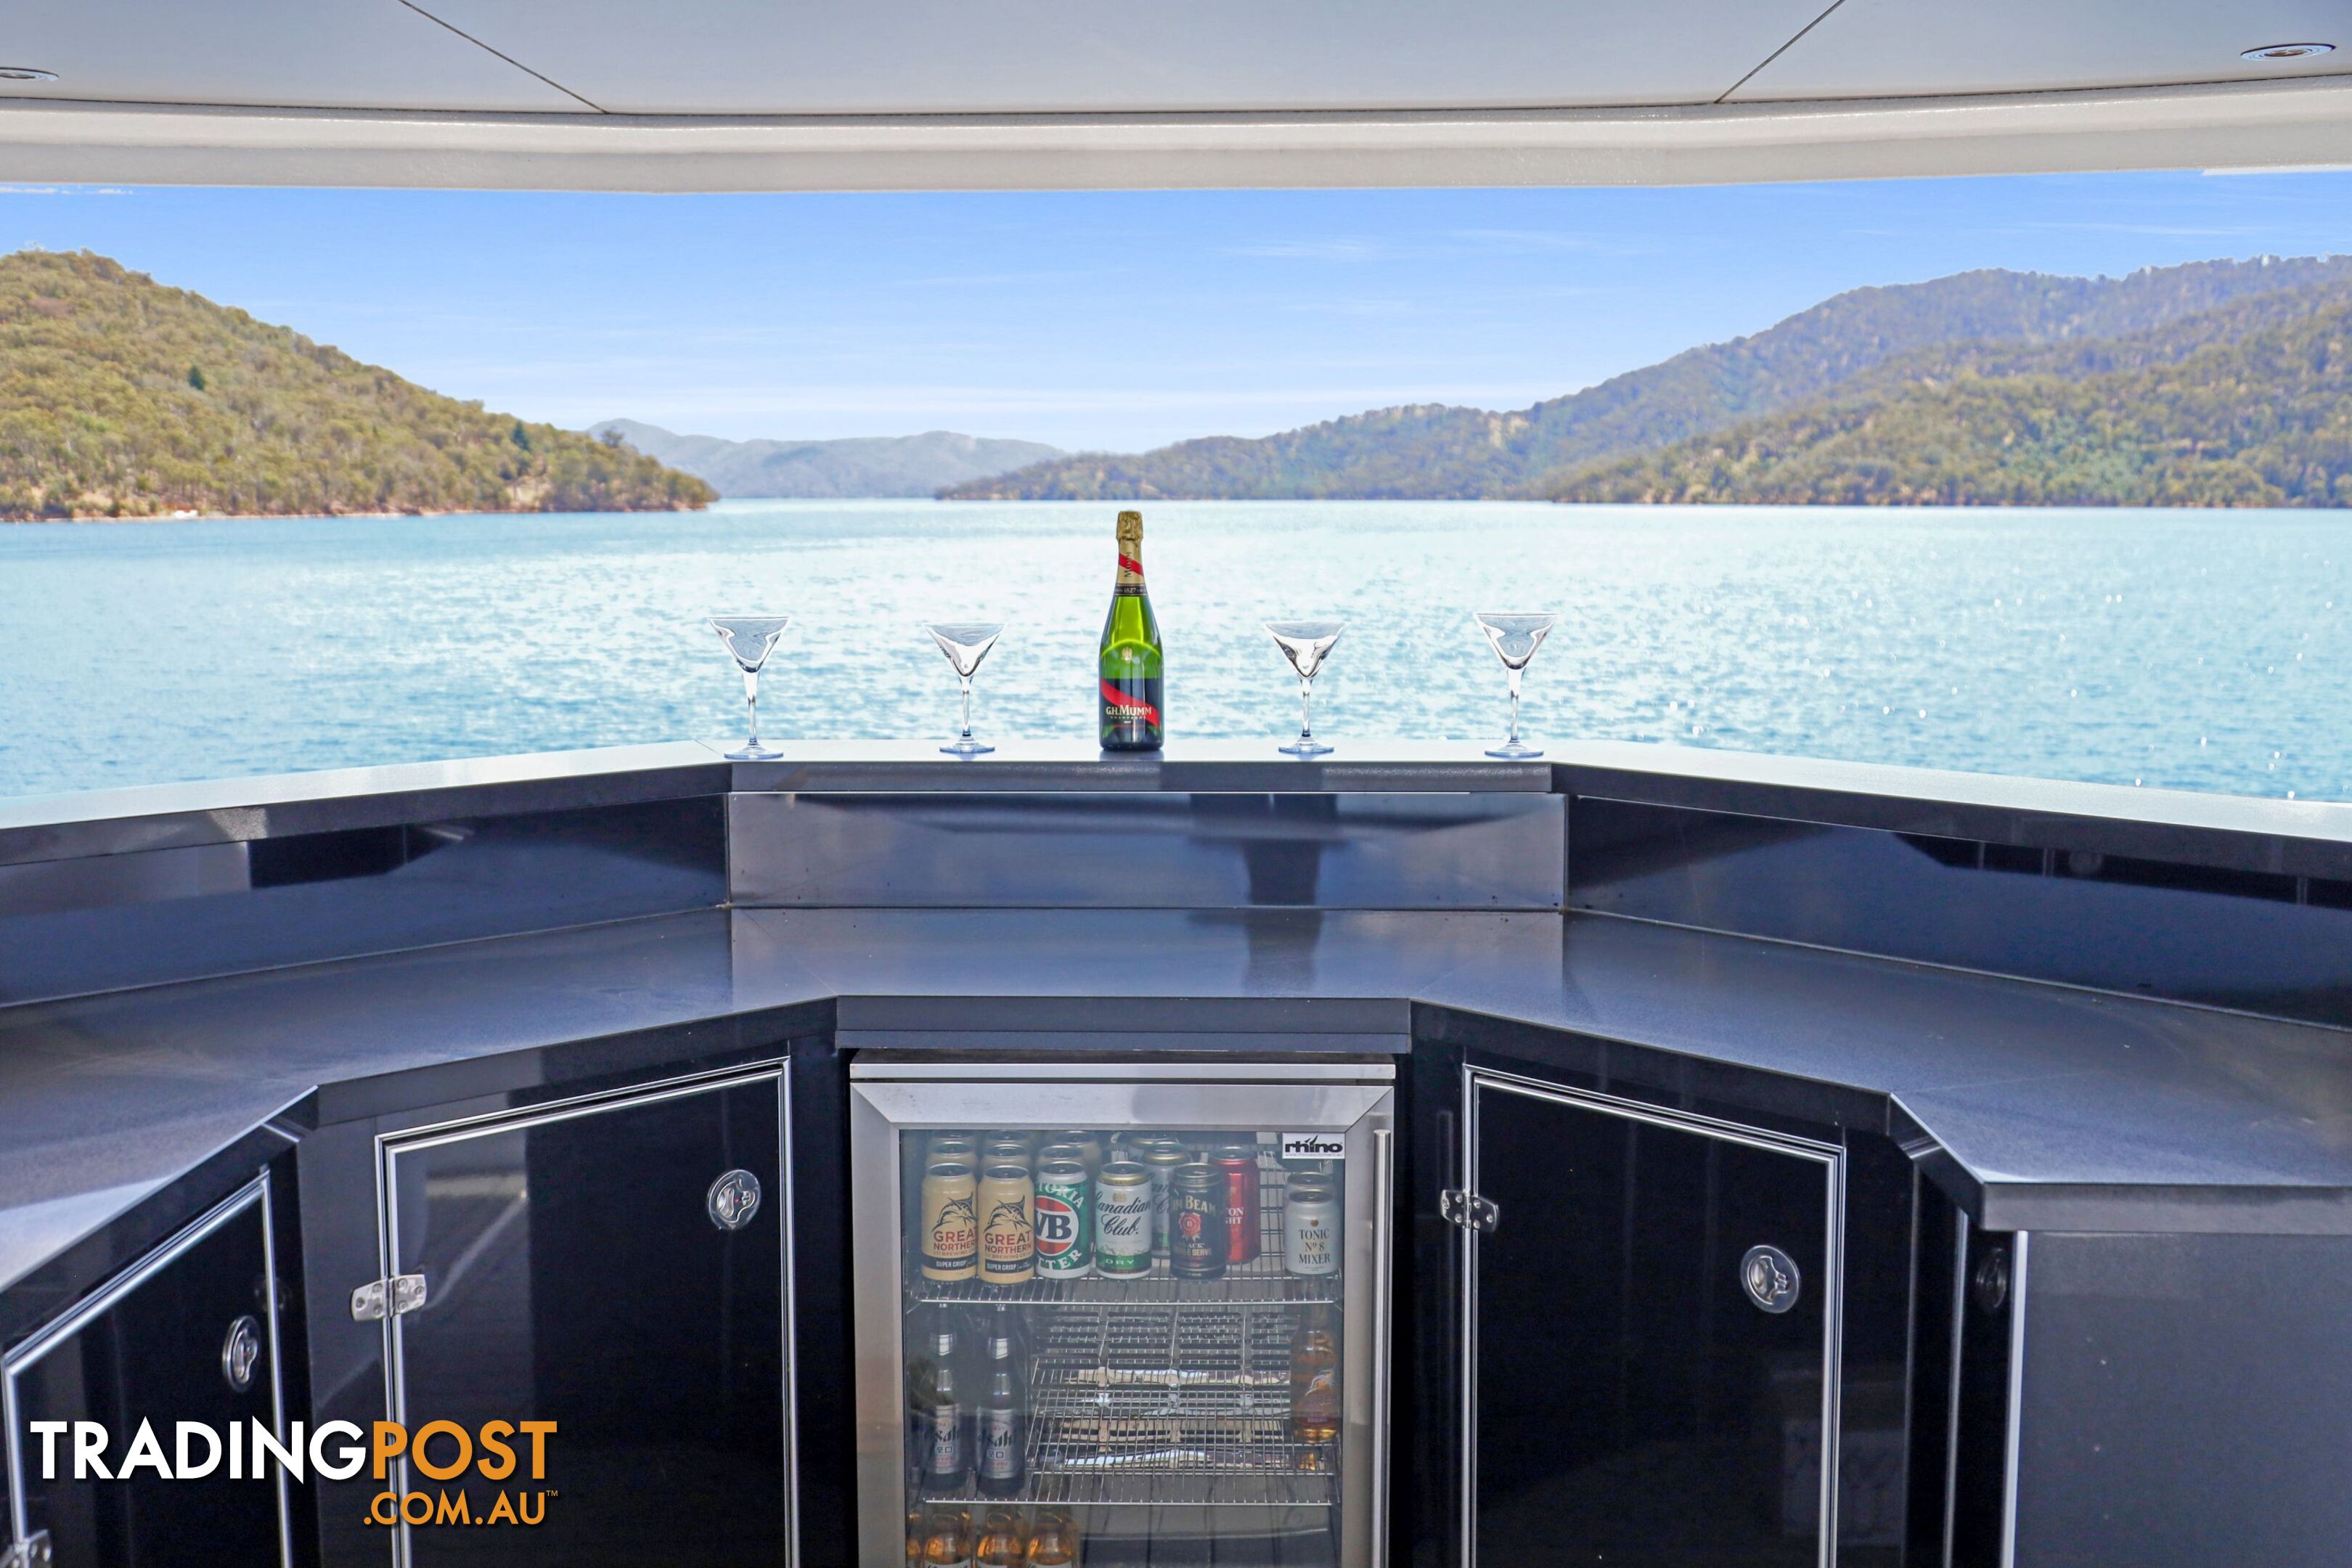 Allure Houseboat Holiday Home on Lake Eildon